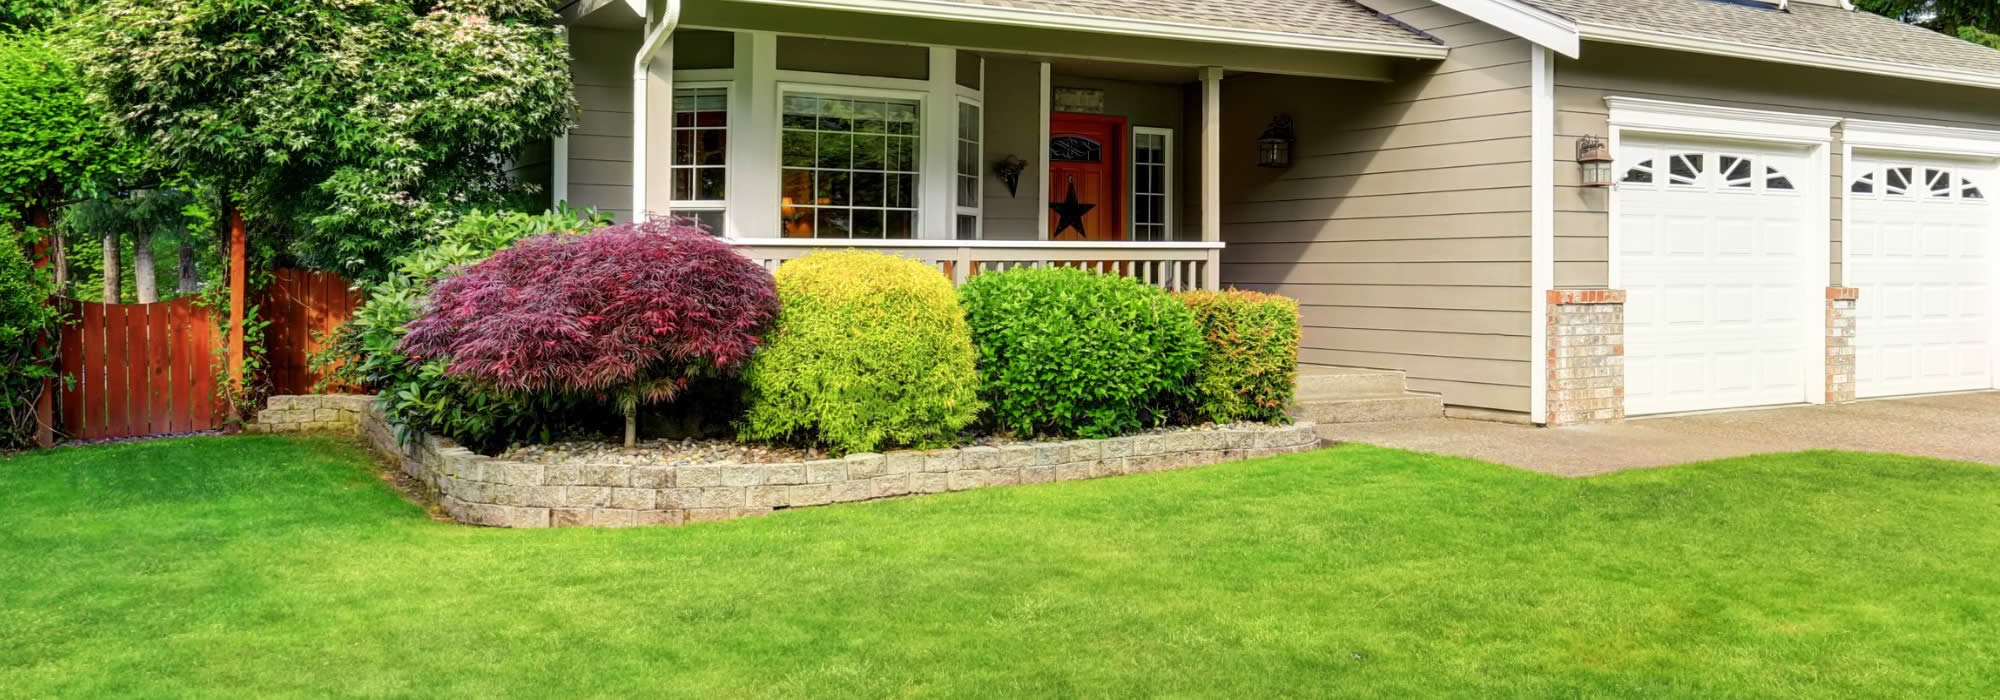 Landscaping Services in Deerfield